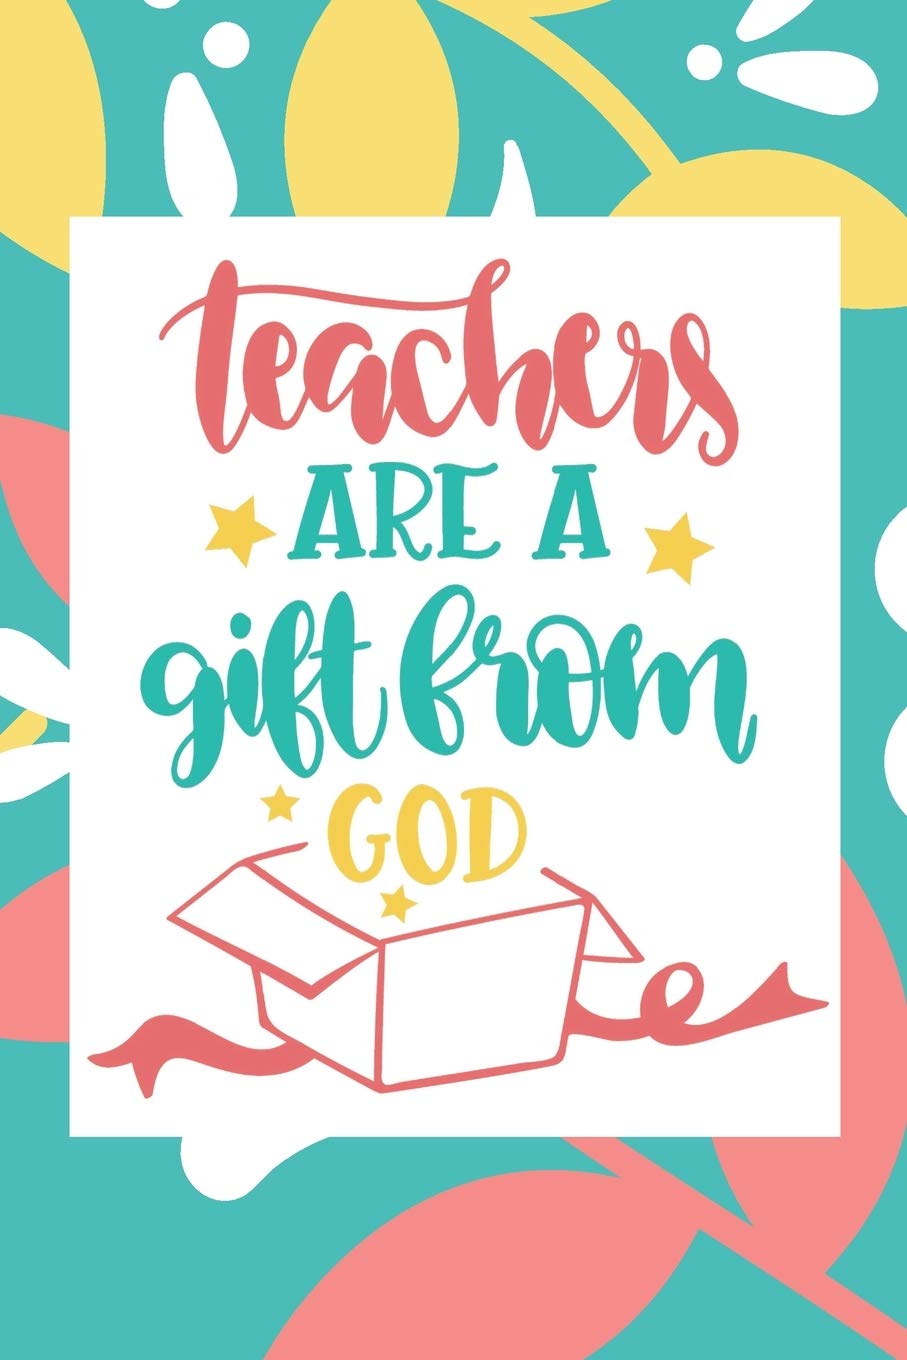 Teachers Are A Gift From God: Sunday School Teacher Monthly Calendar Planner Lined Journal Colorful Floral Design with Inspirational Quote Christian Teacher Appreciation /Thank You/ Retirement Gift: Stationery, Teacher Heart: 9781699041093: Amazon.com